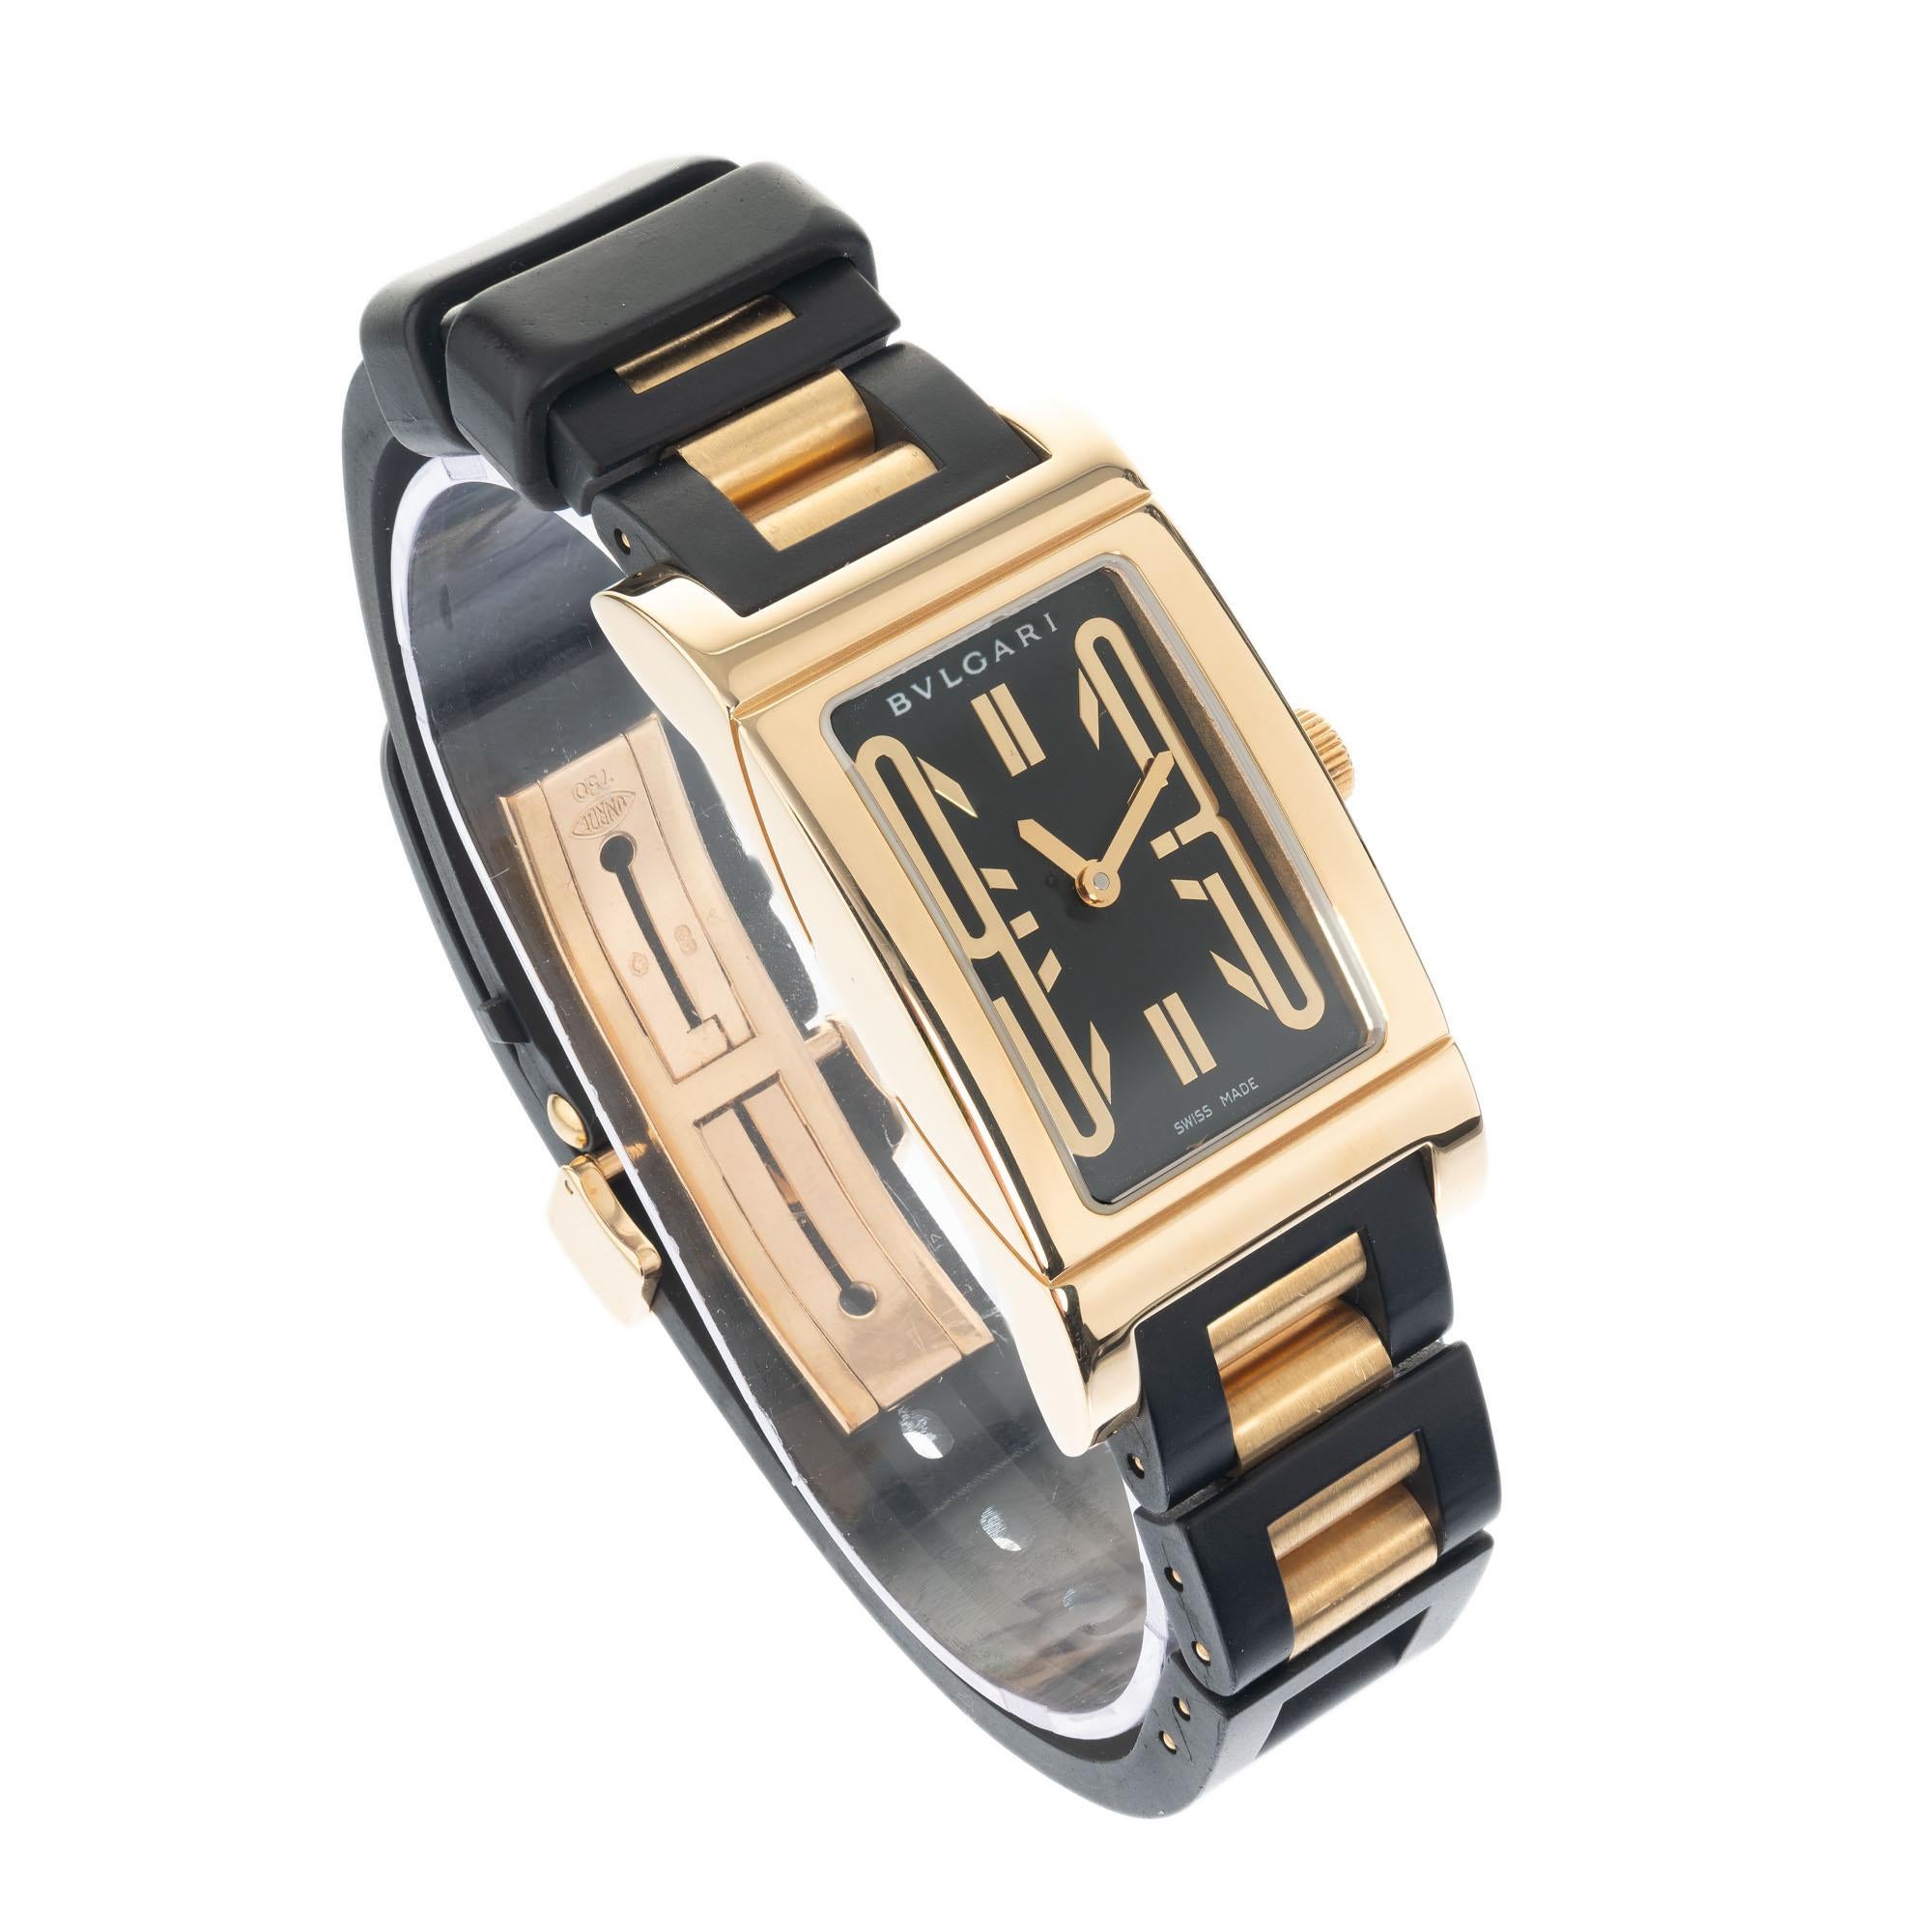 Well-crafted for Bvlgari 18k yellow gold ladies Rettangolo quartz watch. 18k yellow gold and rubber band with an Bvlgari deployment buckle. Length: 6.5-7.5 Inches

Length: 38.75mm
Width: 20.98mm
Band width at case: 15mm
Case thickness: 7.33mm
Band: